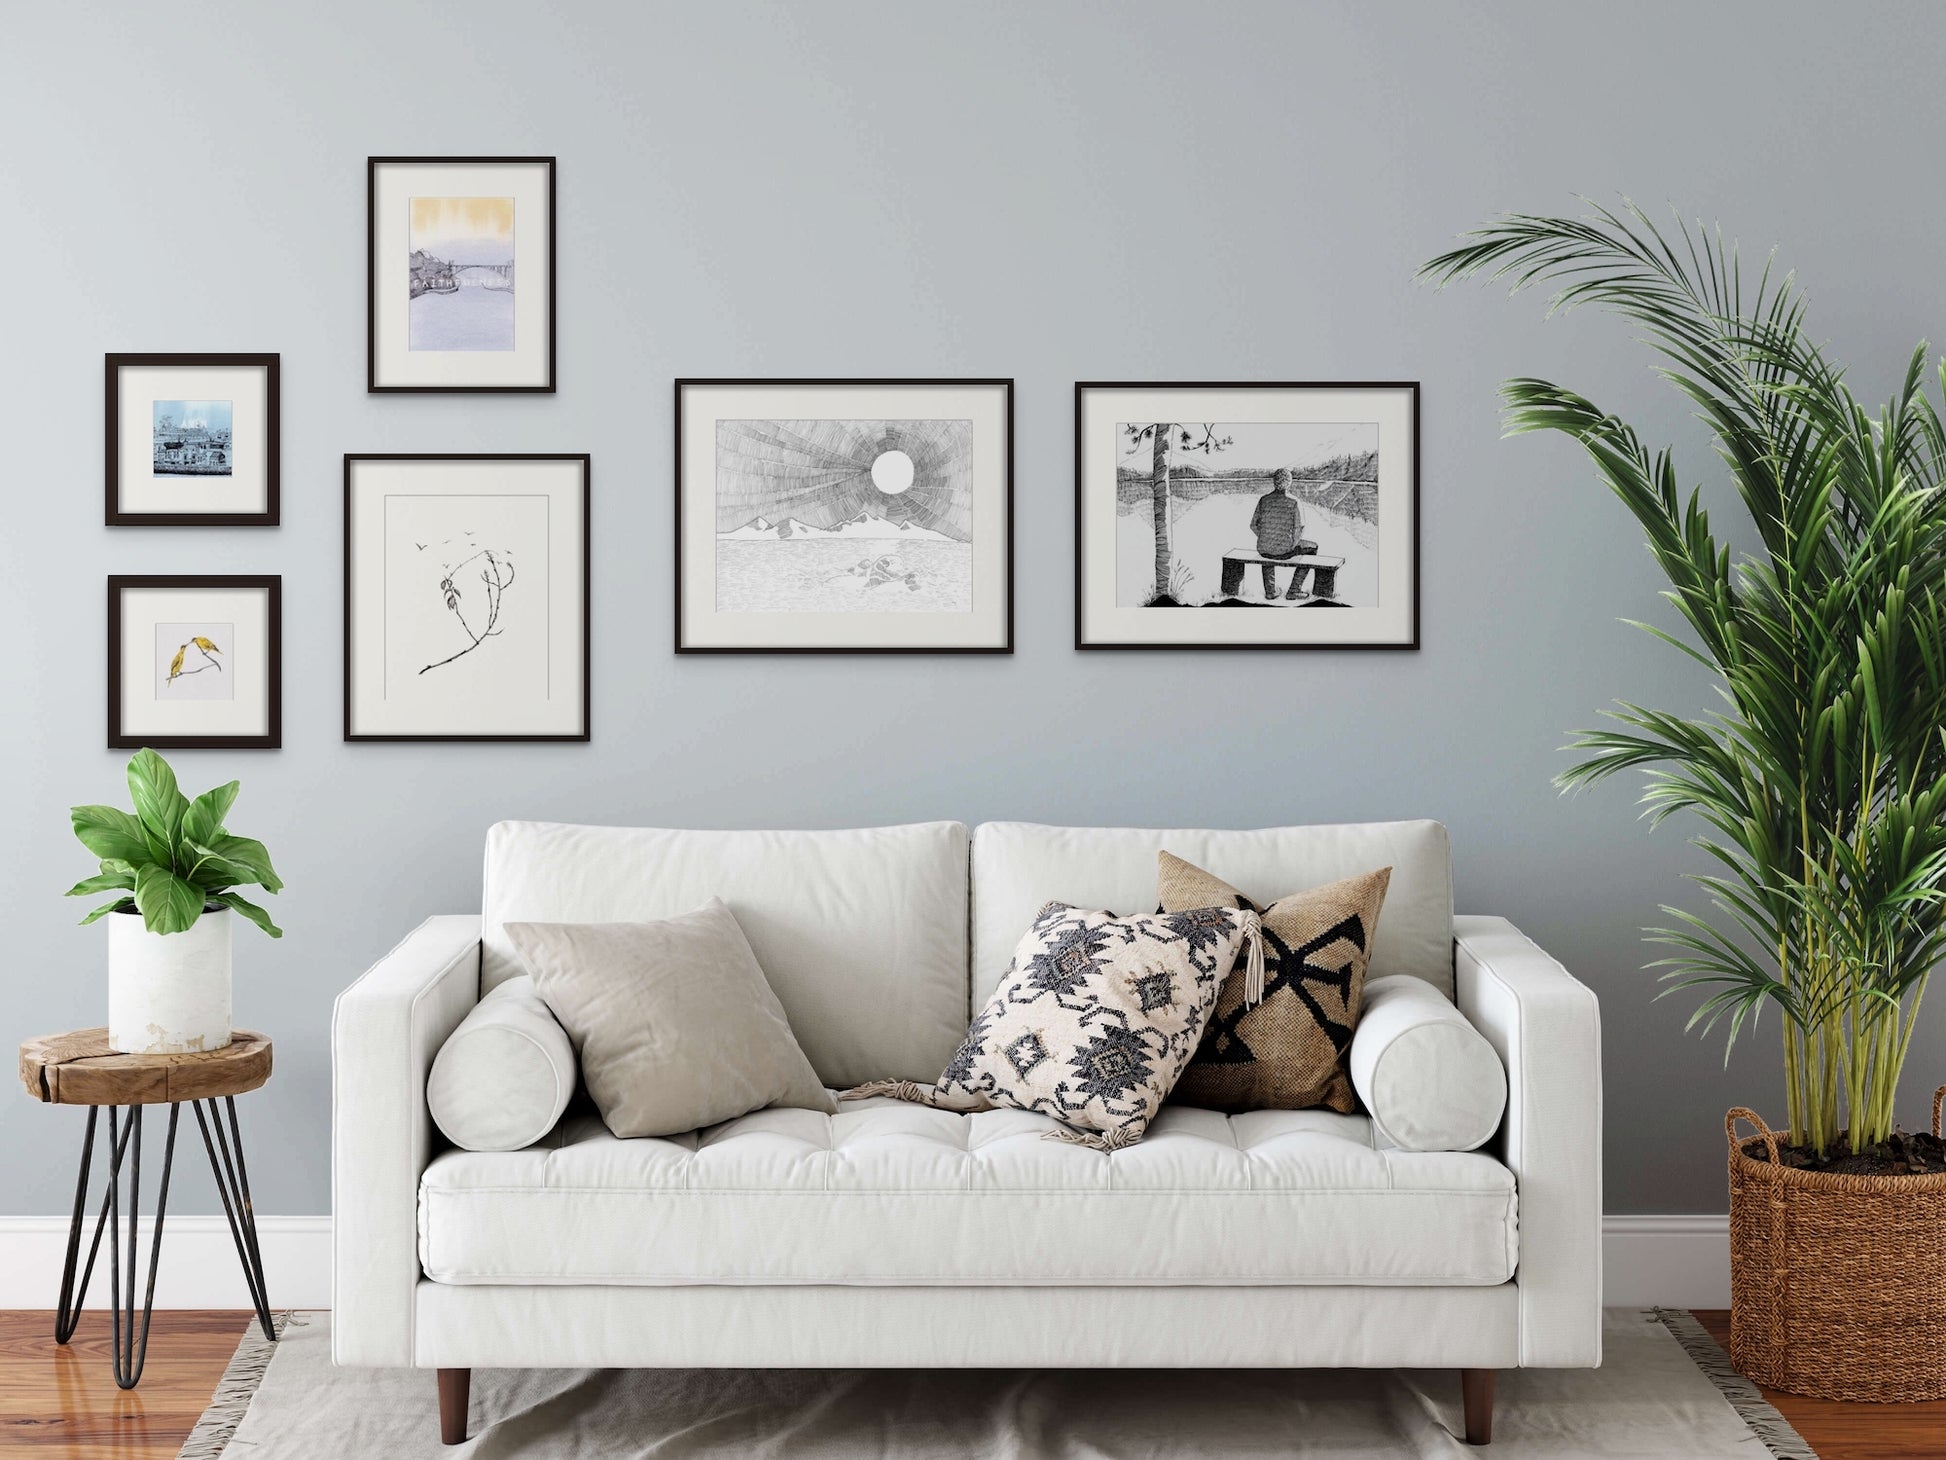 Image: a gallery wall of framed line drawing art prints in a living room